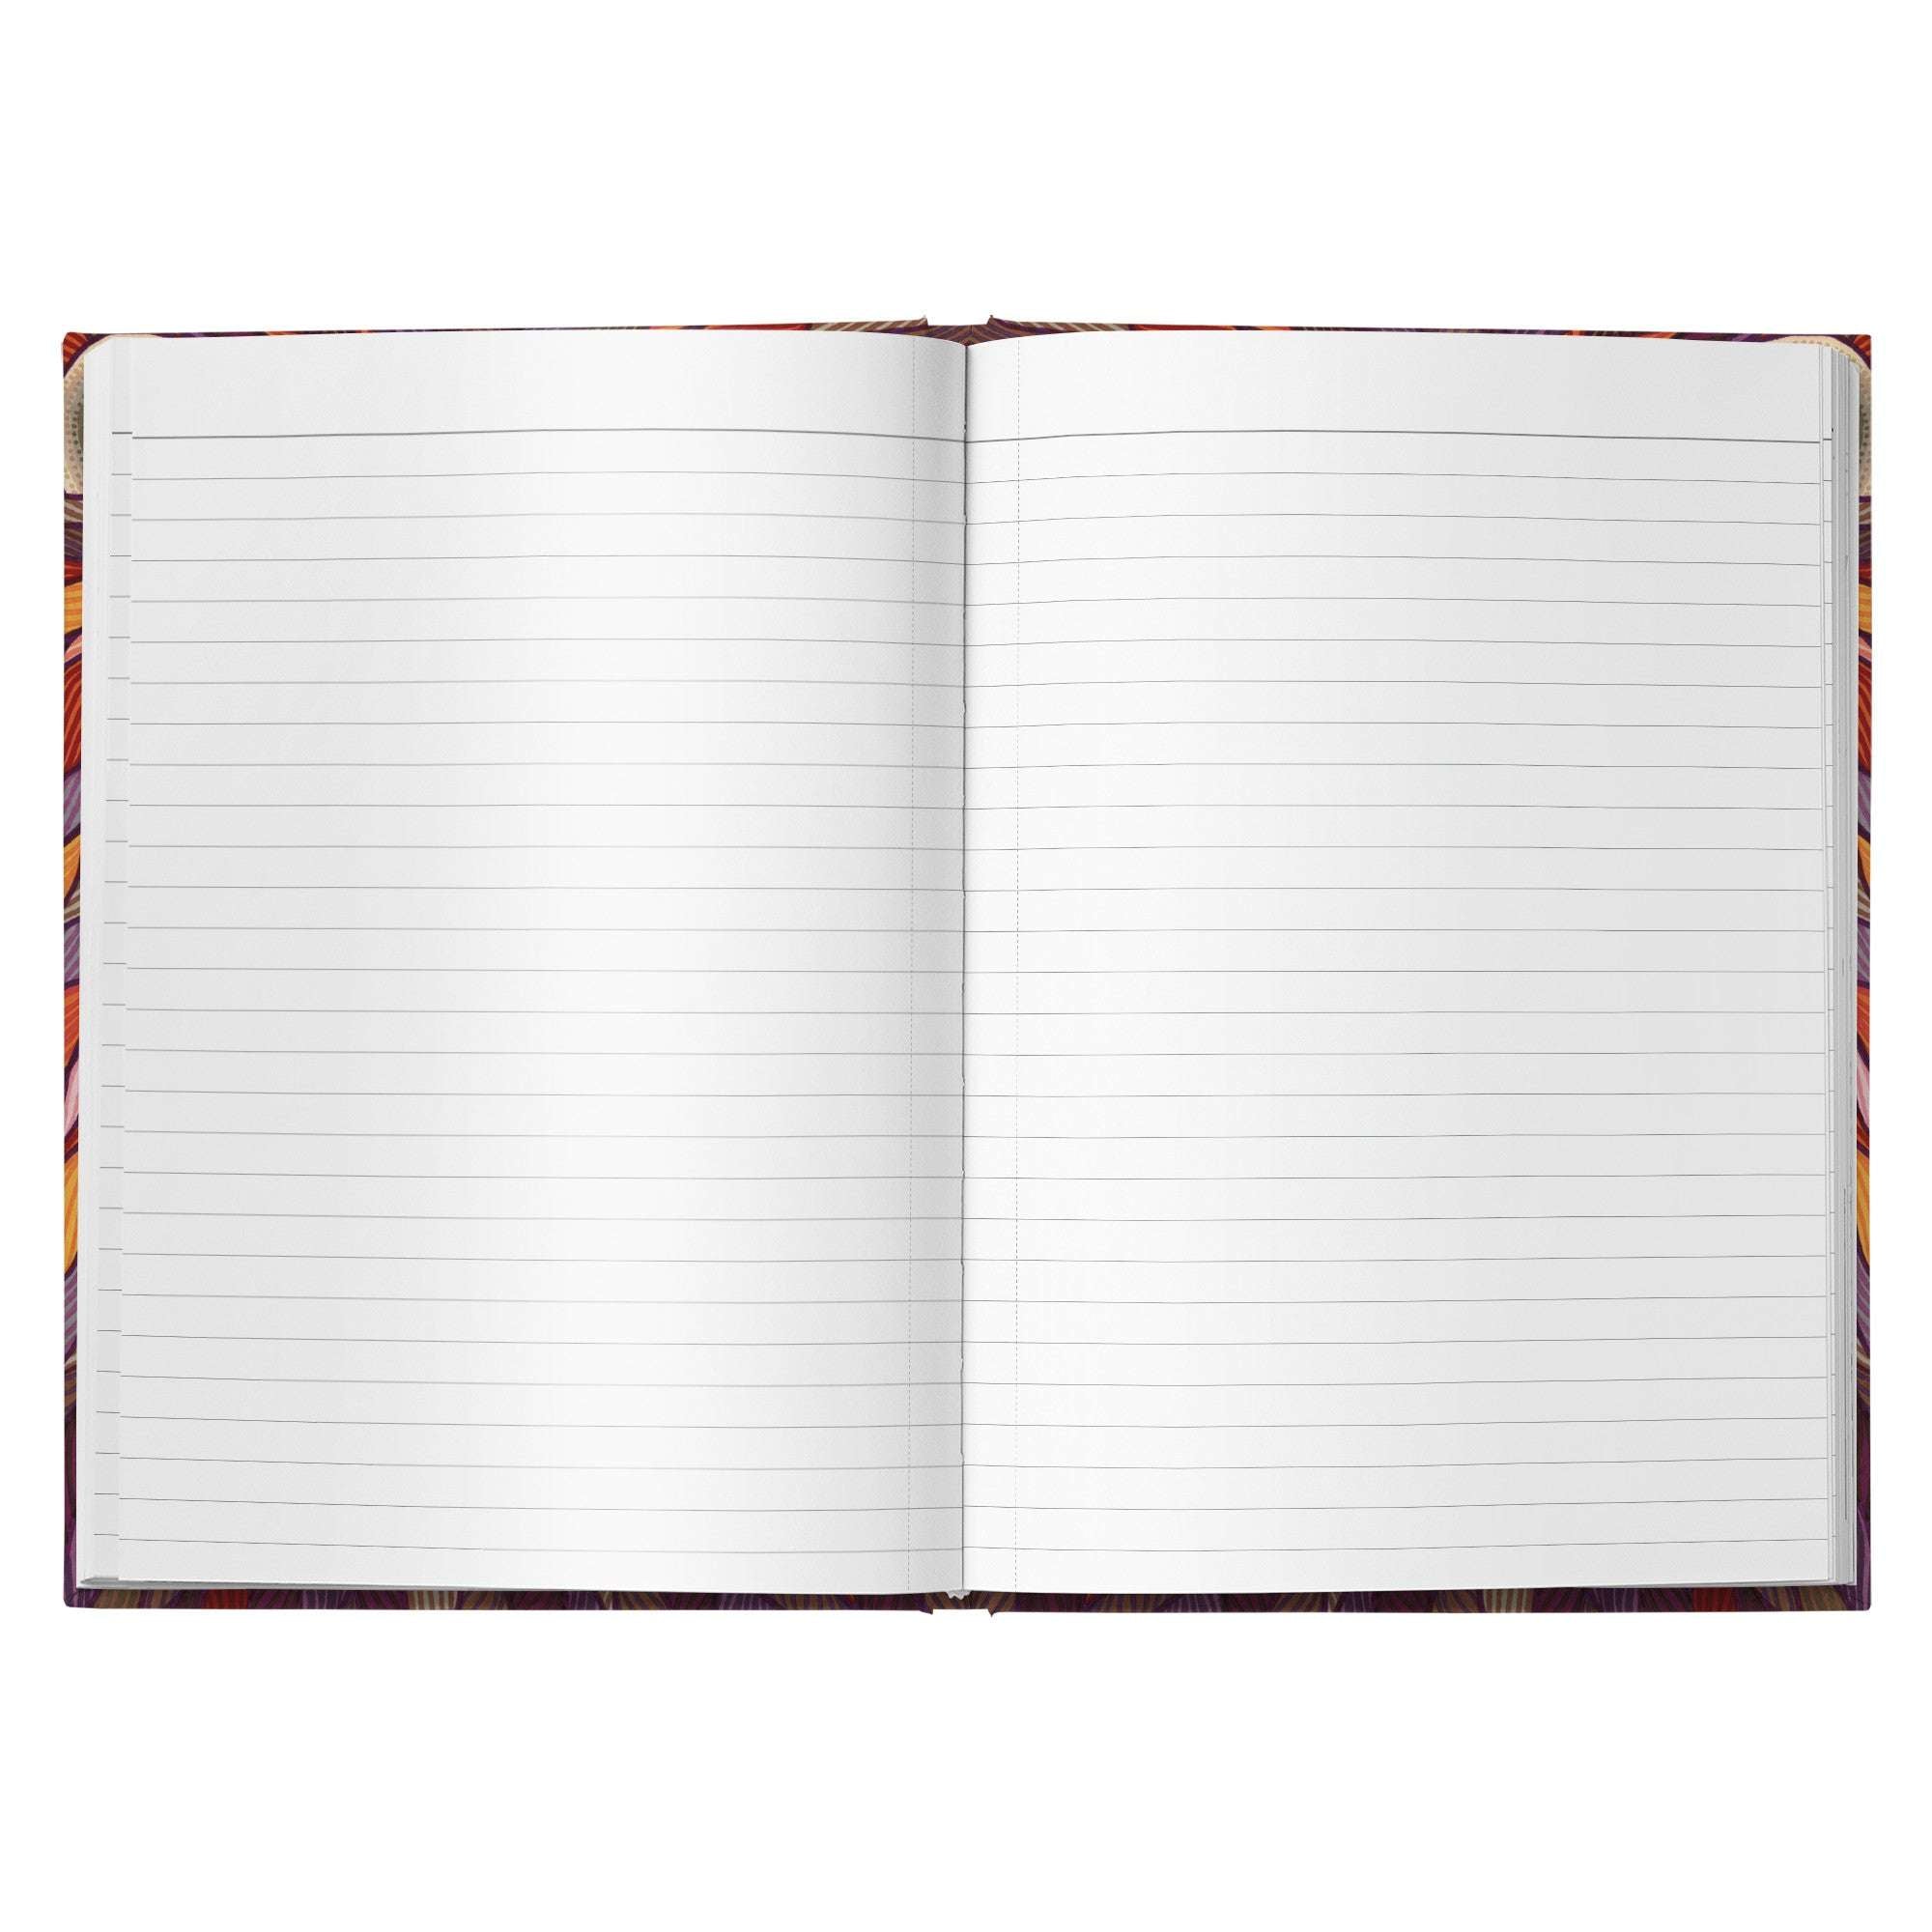 Open Lion Pride Journal with lined pages, displayed flat, showing visible margins and binding.